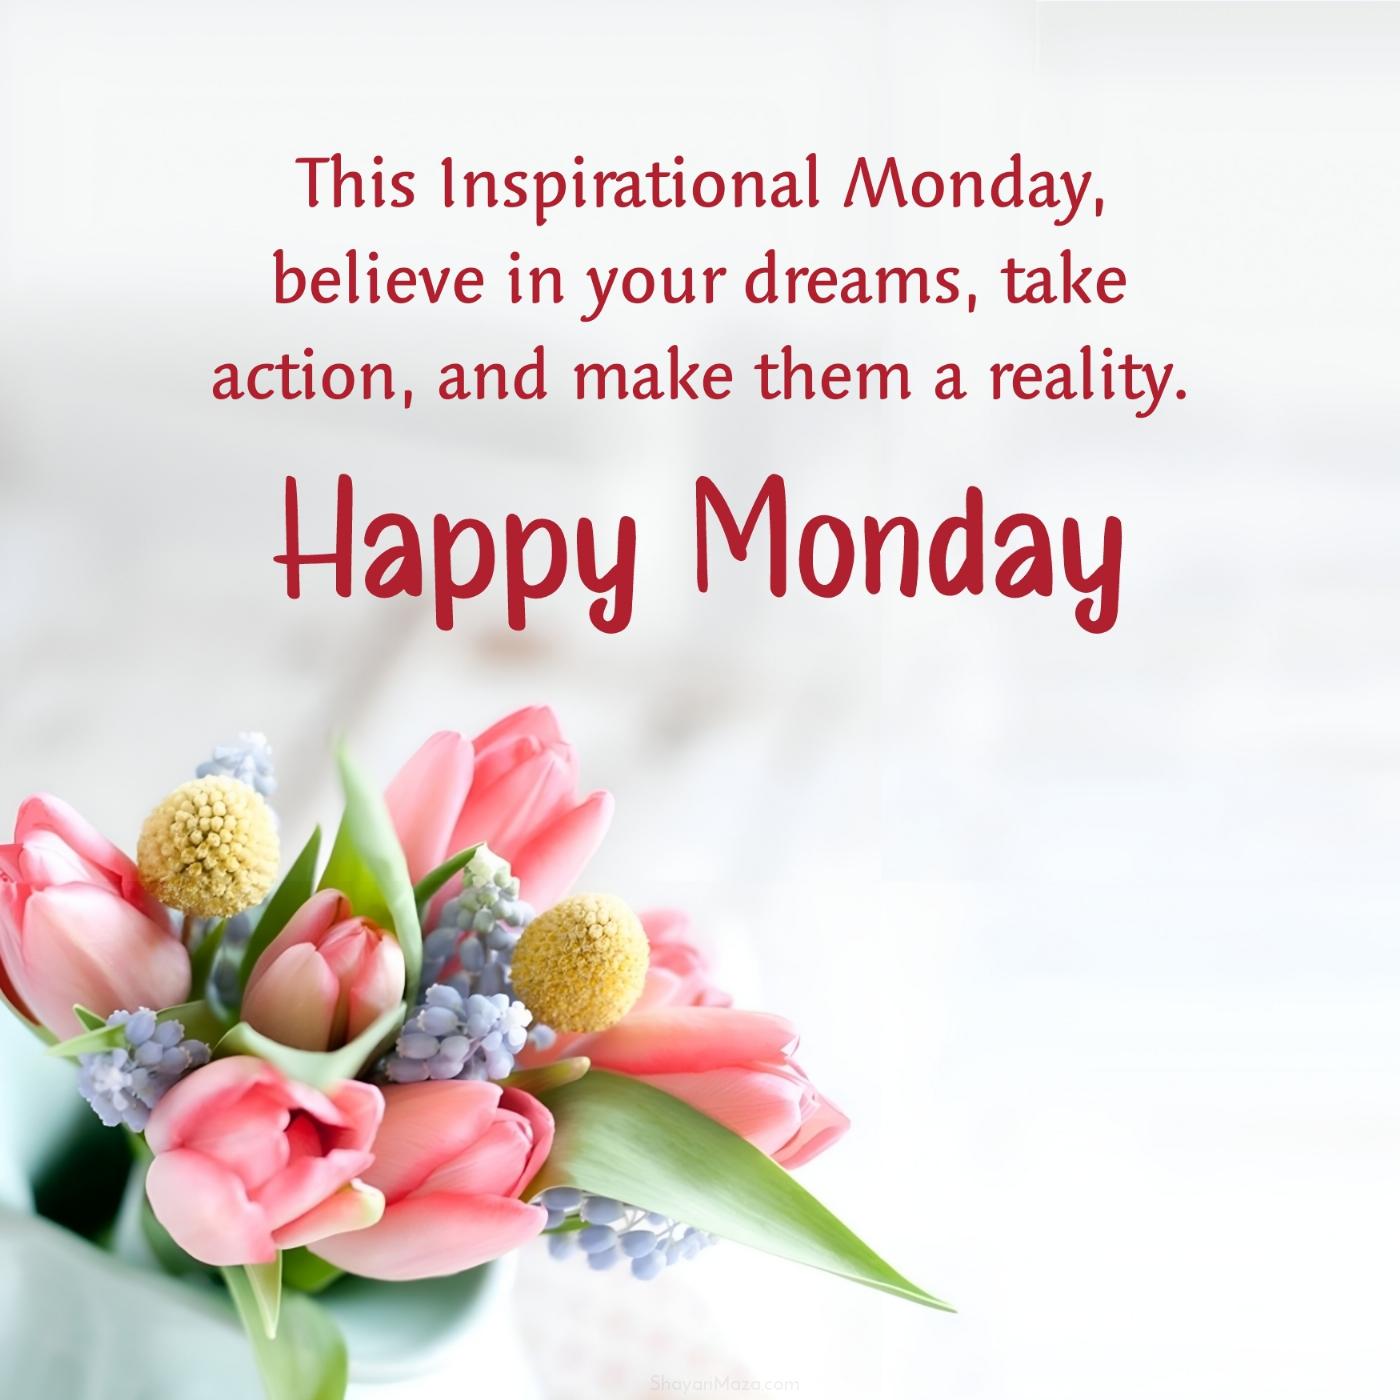 This Inspirational Monday believe in your dreams take action